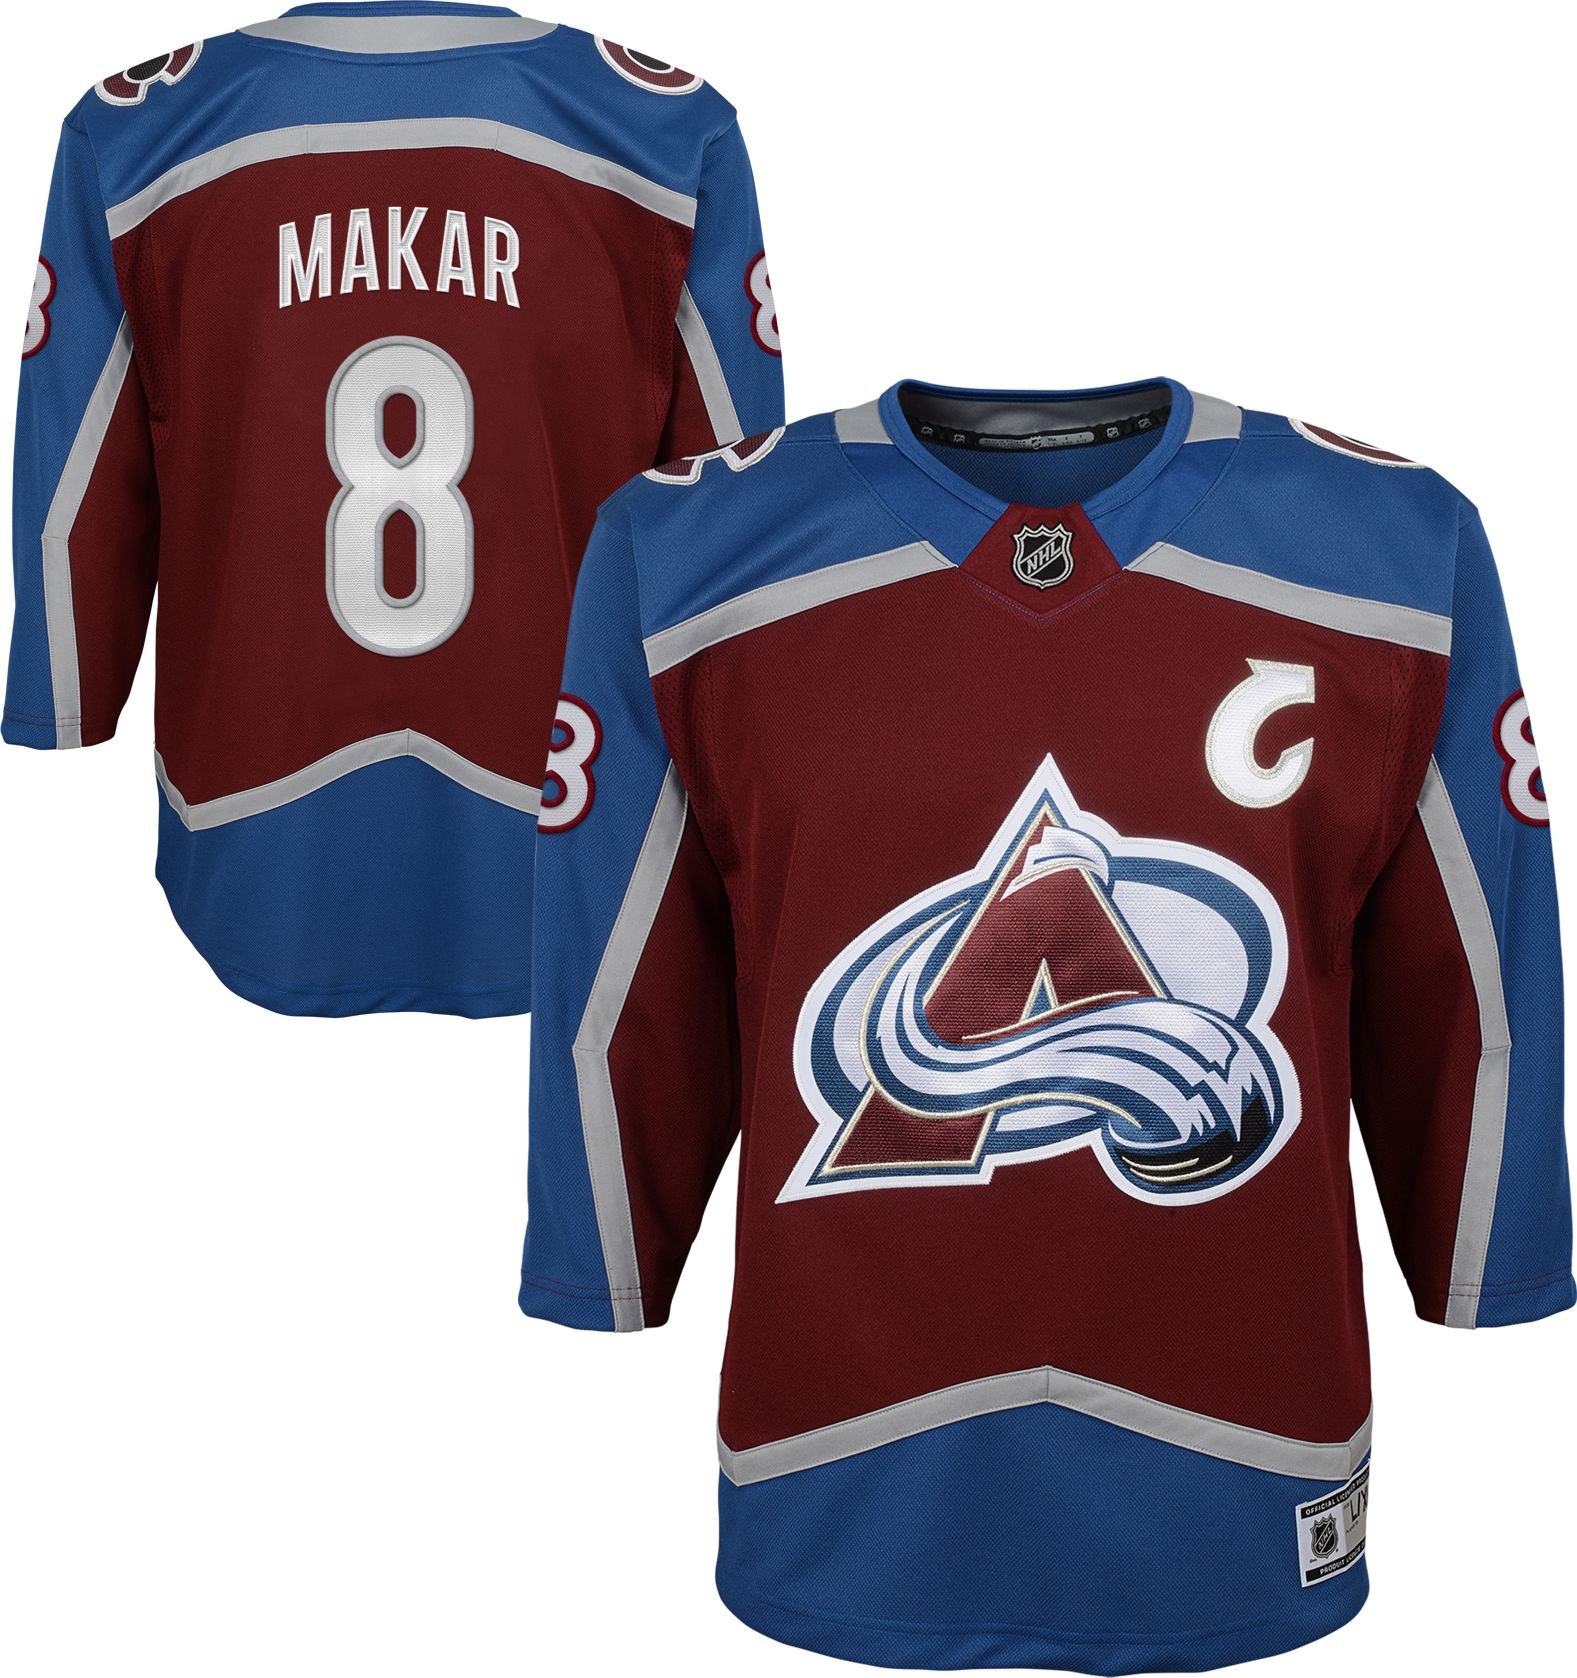 Avalanche official merchandise